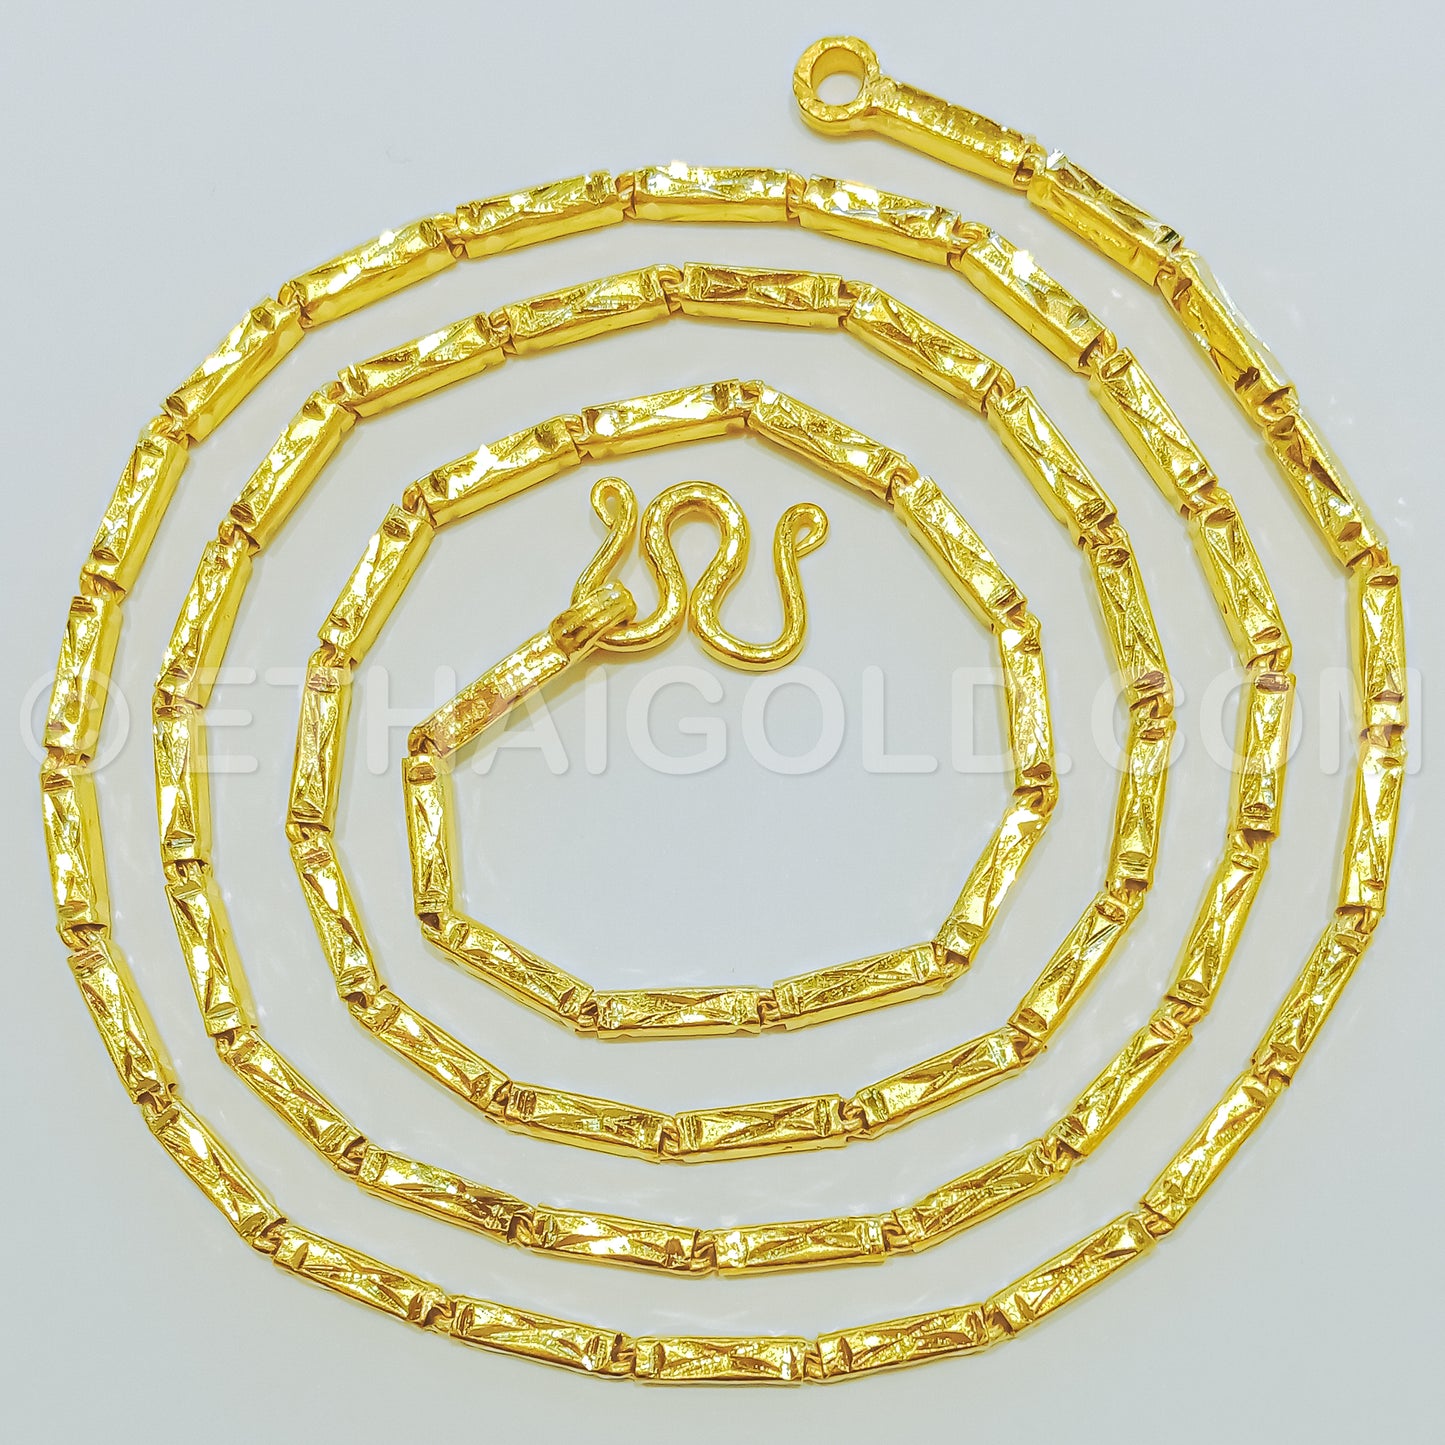 1/2 BAHT POLISHED DIAMOND-CUT SOLID SQUARE BARREL CHAIN NECKLACE IN 23K GOLD (ID: N3202S)